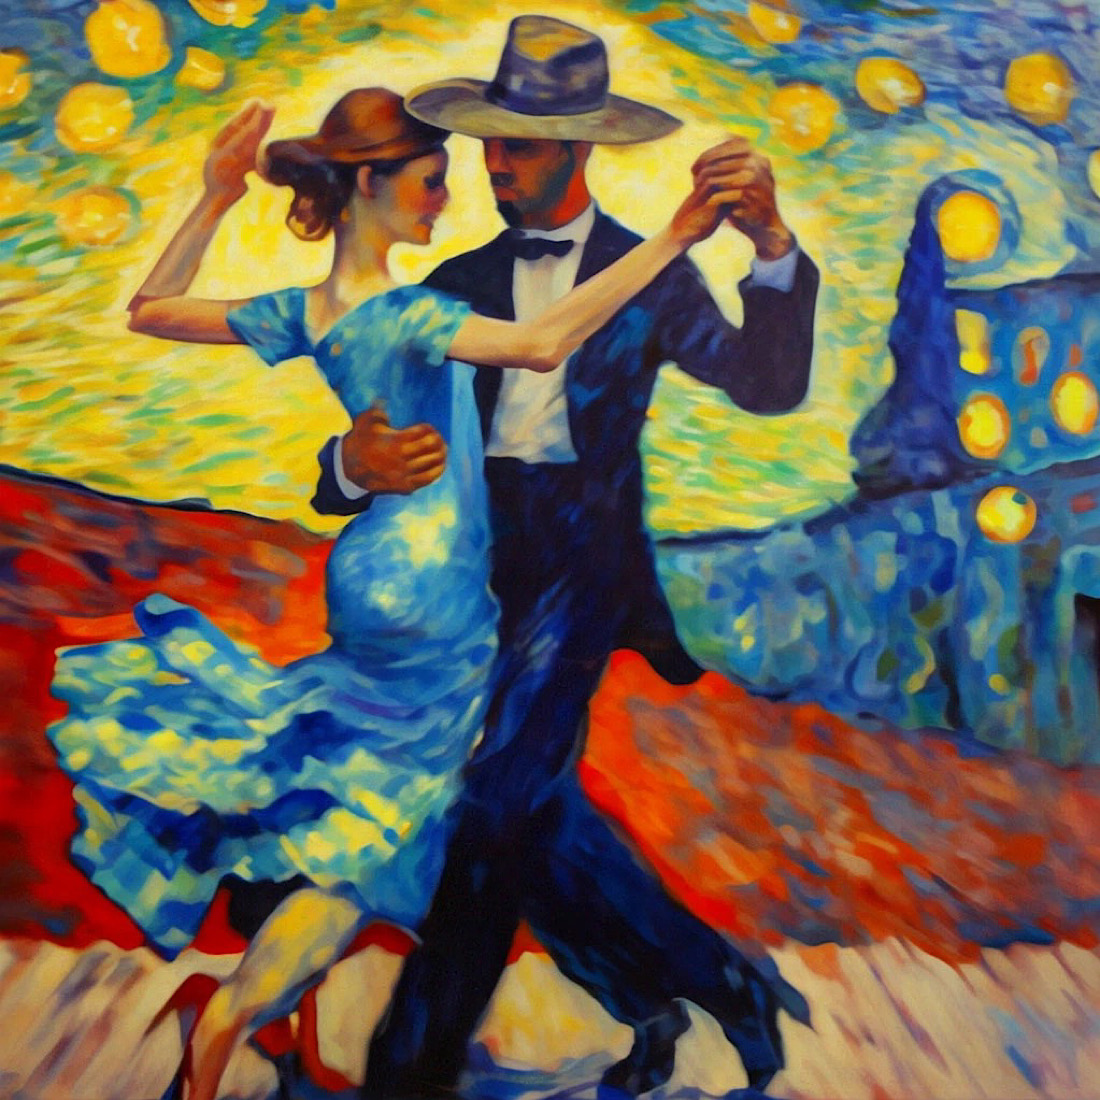 Oil painting in the style of Van Gogh "Tango" preview image.